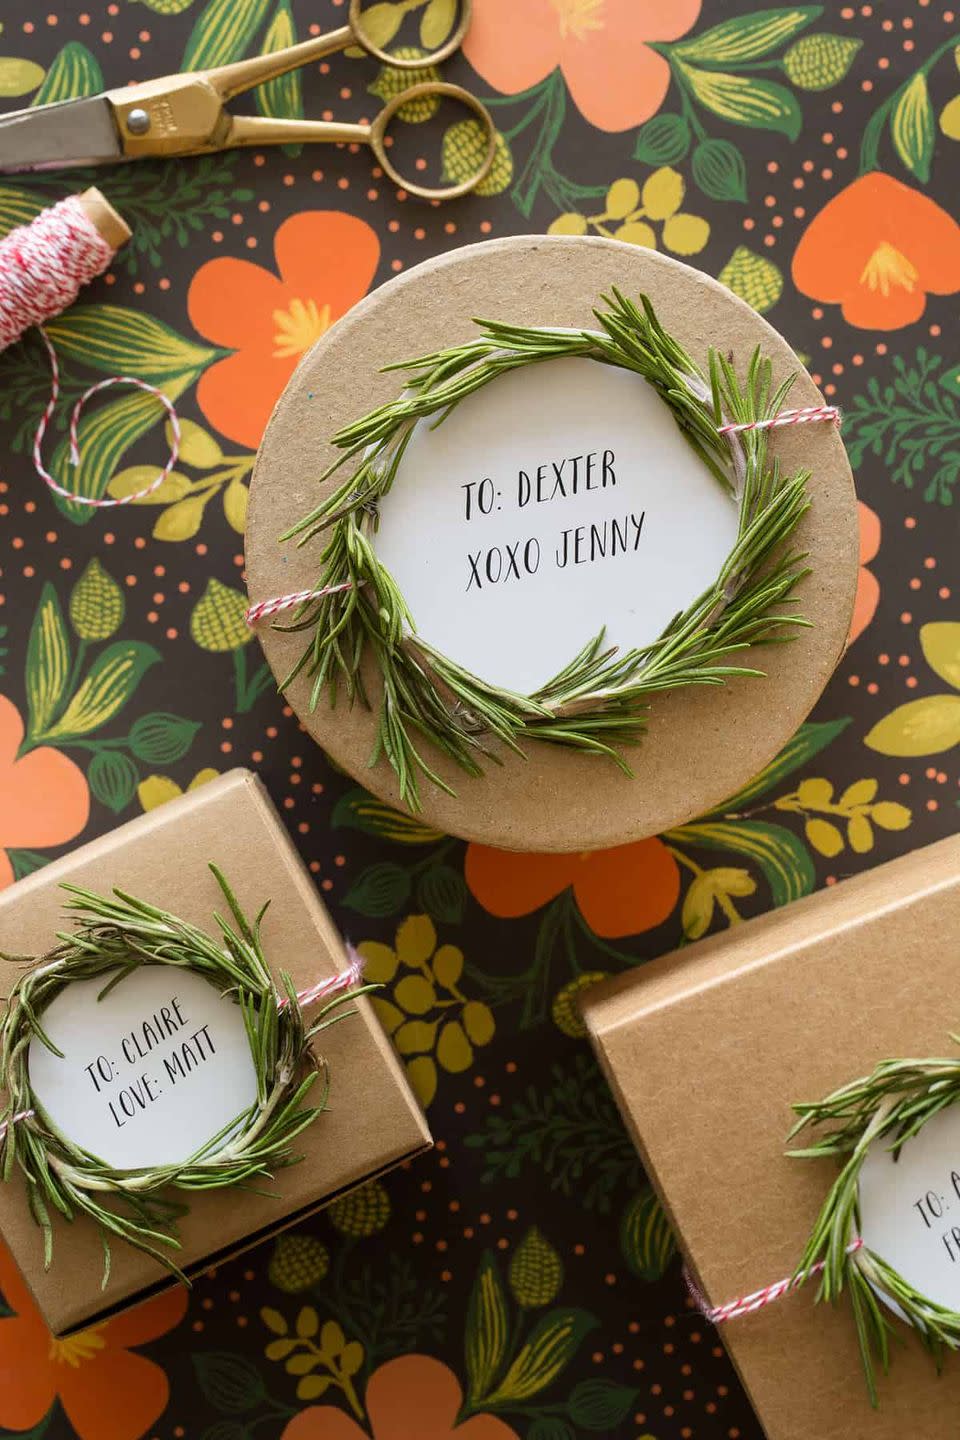 <p>Rosemary isn’t only for your kitchen! In this case, the herb makes for a pretty perfect gift topper too.<br></p><p><strong>Get the tutorial at <a href="https://www.spoonforkbacon.com/rosemary-wreath-gift-toppers/" rel="nofollow noopener" target="_blank" data-ylk="slk:Spoon Fork Bacon" class="link rapid-noclick-resp">Spoon Fork Bacon</a>. </strong> </p>